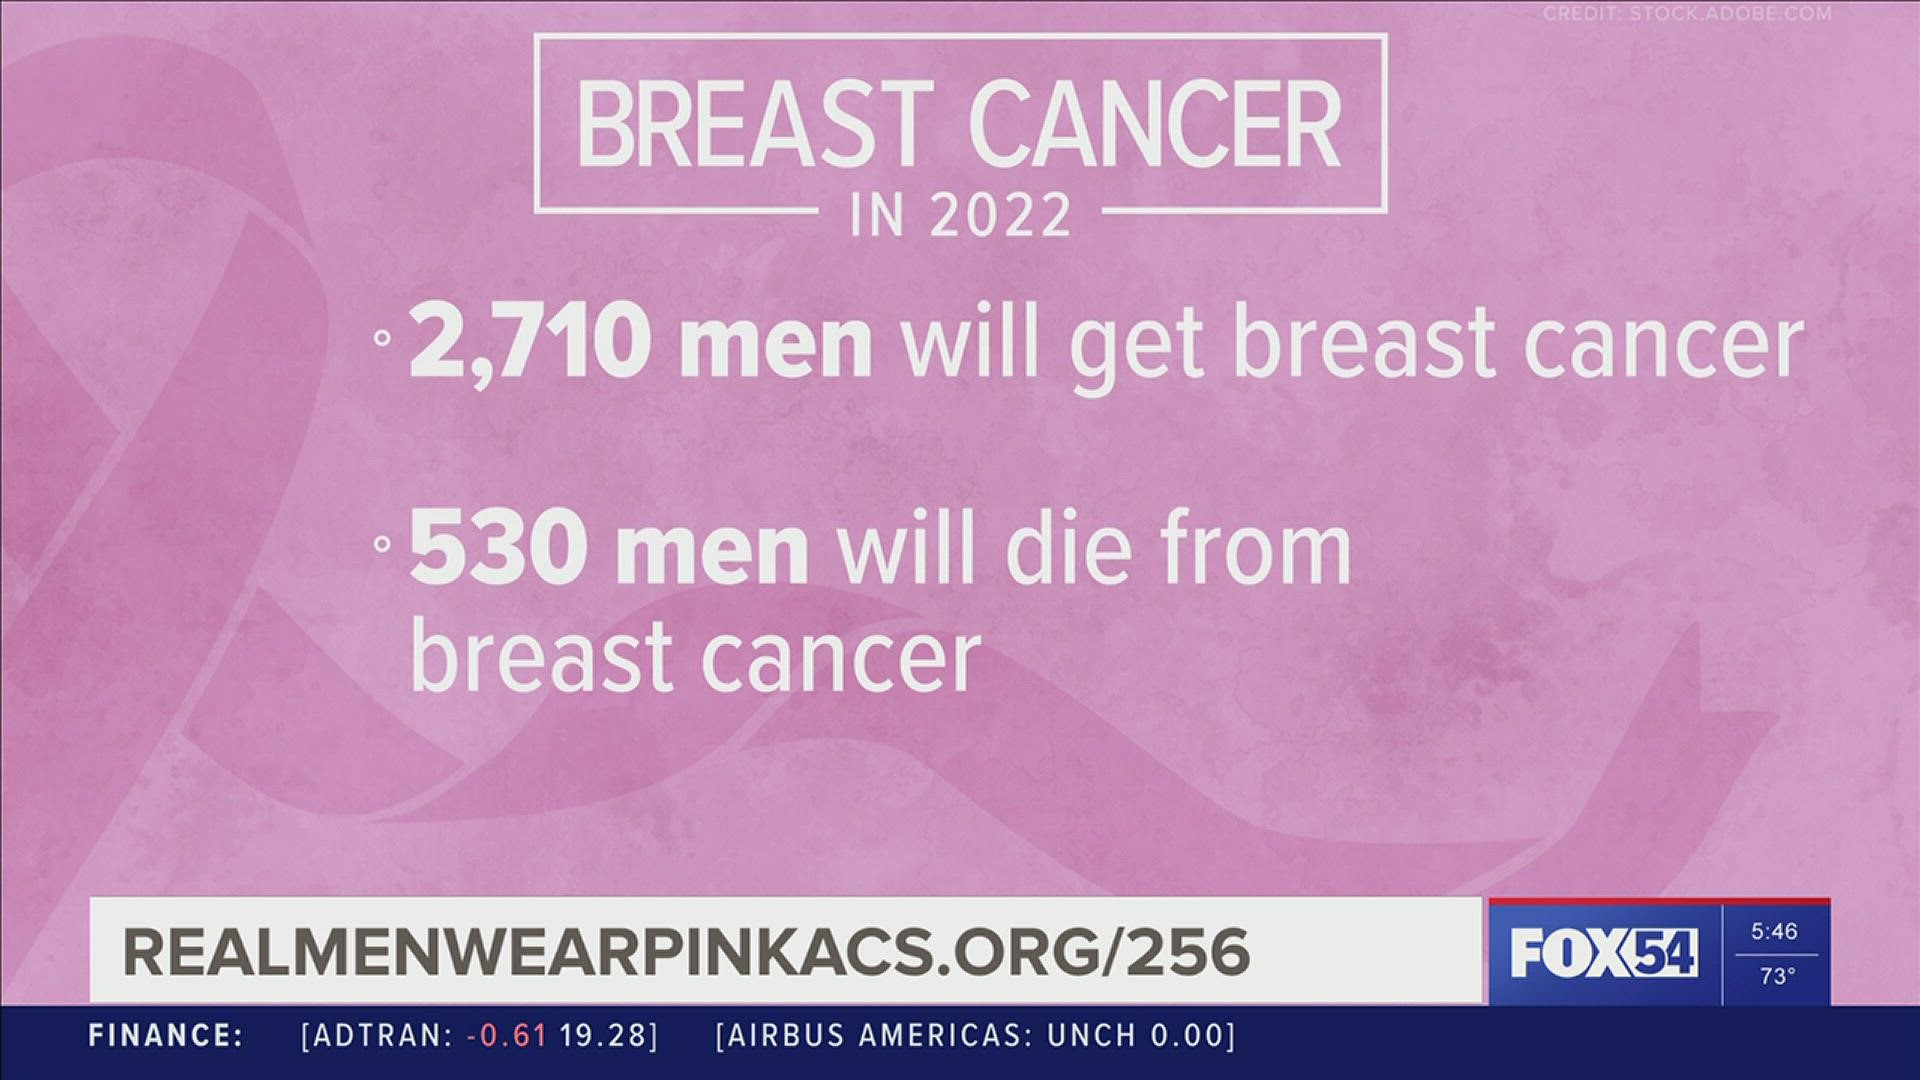 The Real Men Wear Pink Campaign continues into 2022